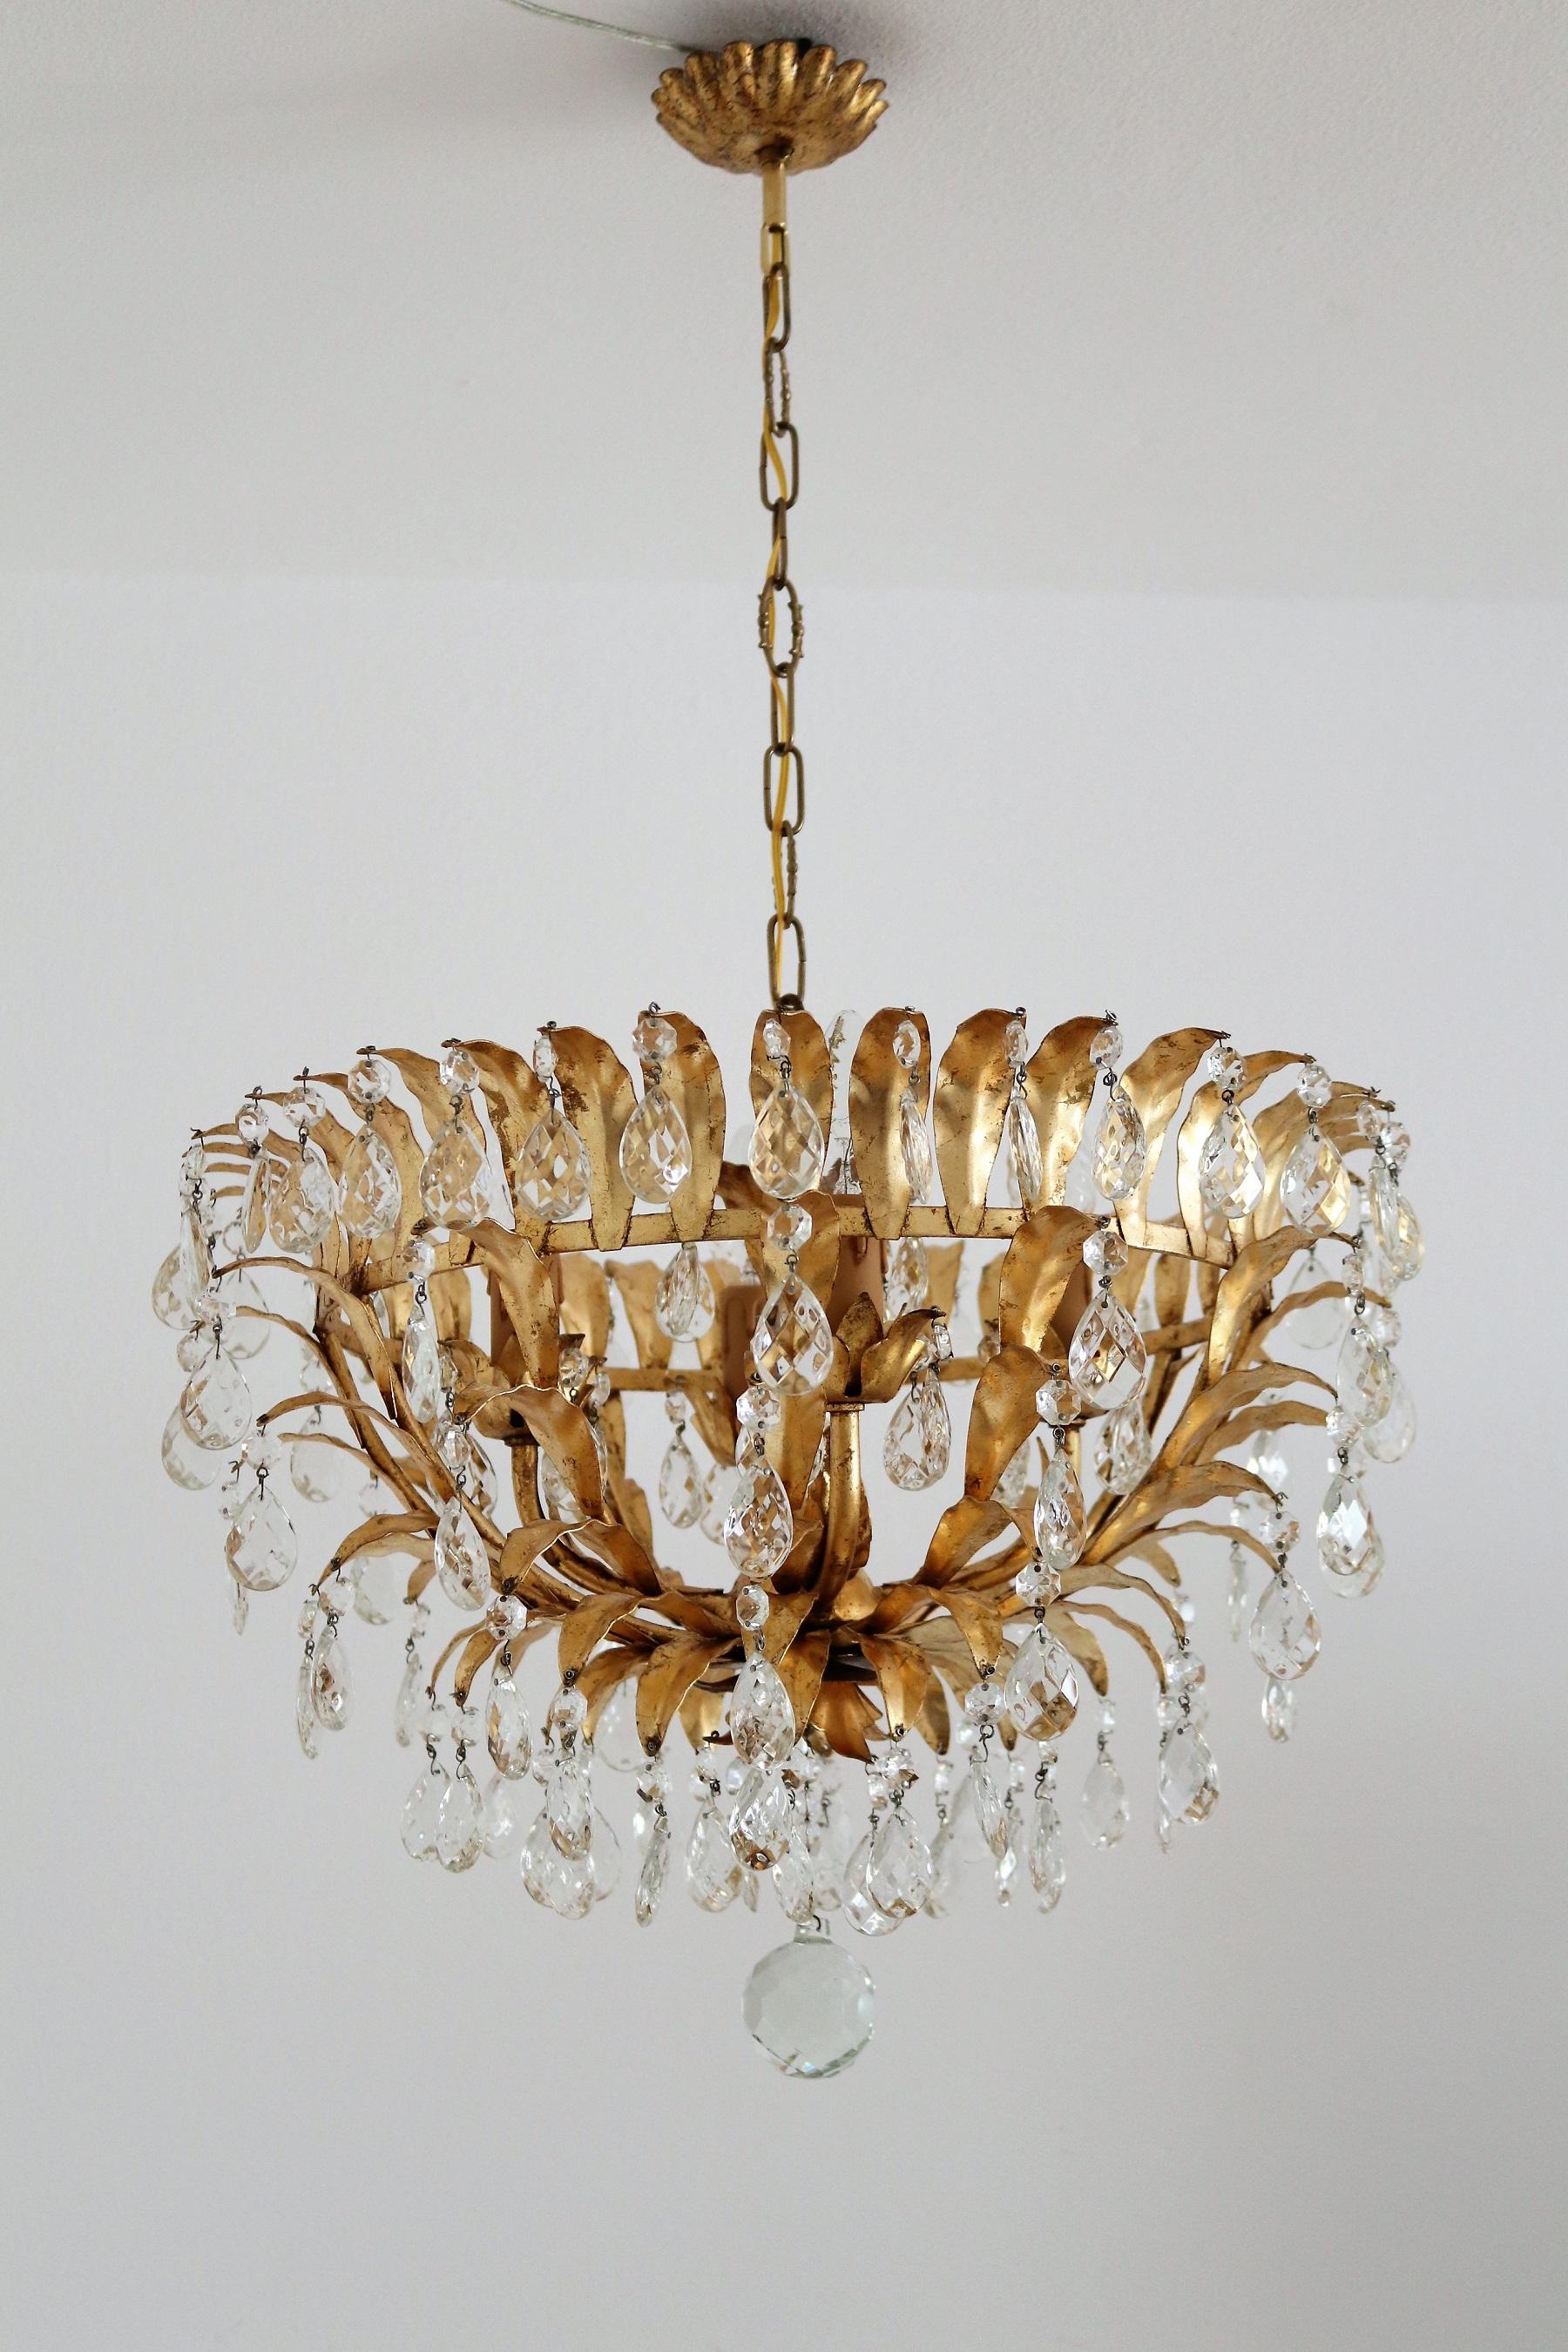 20th Century Italian Midcentury Gilt Crystal Flush Mount Chandelier with Leafes by Banci 